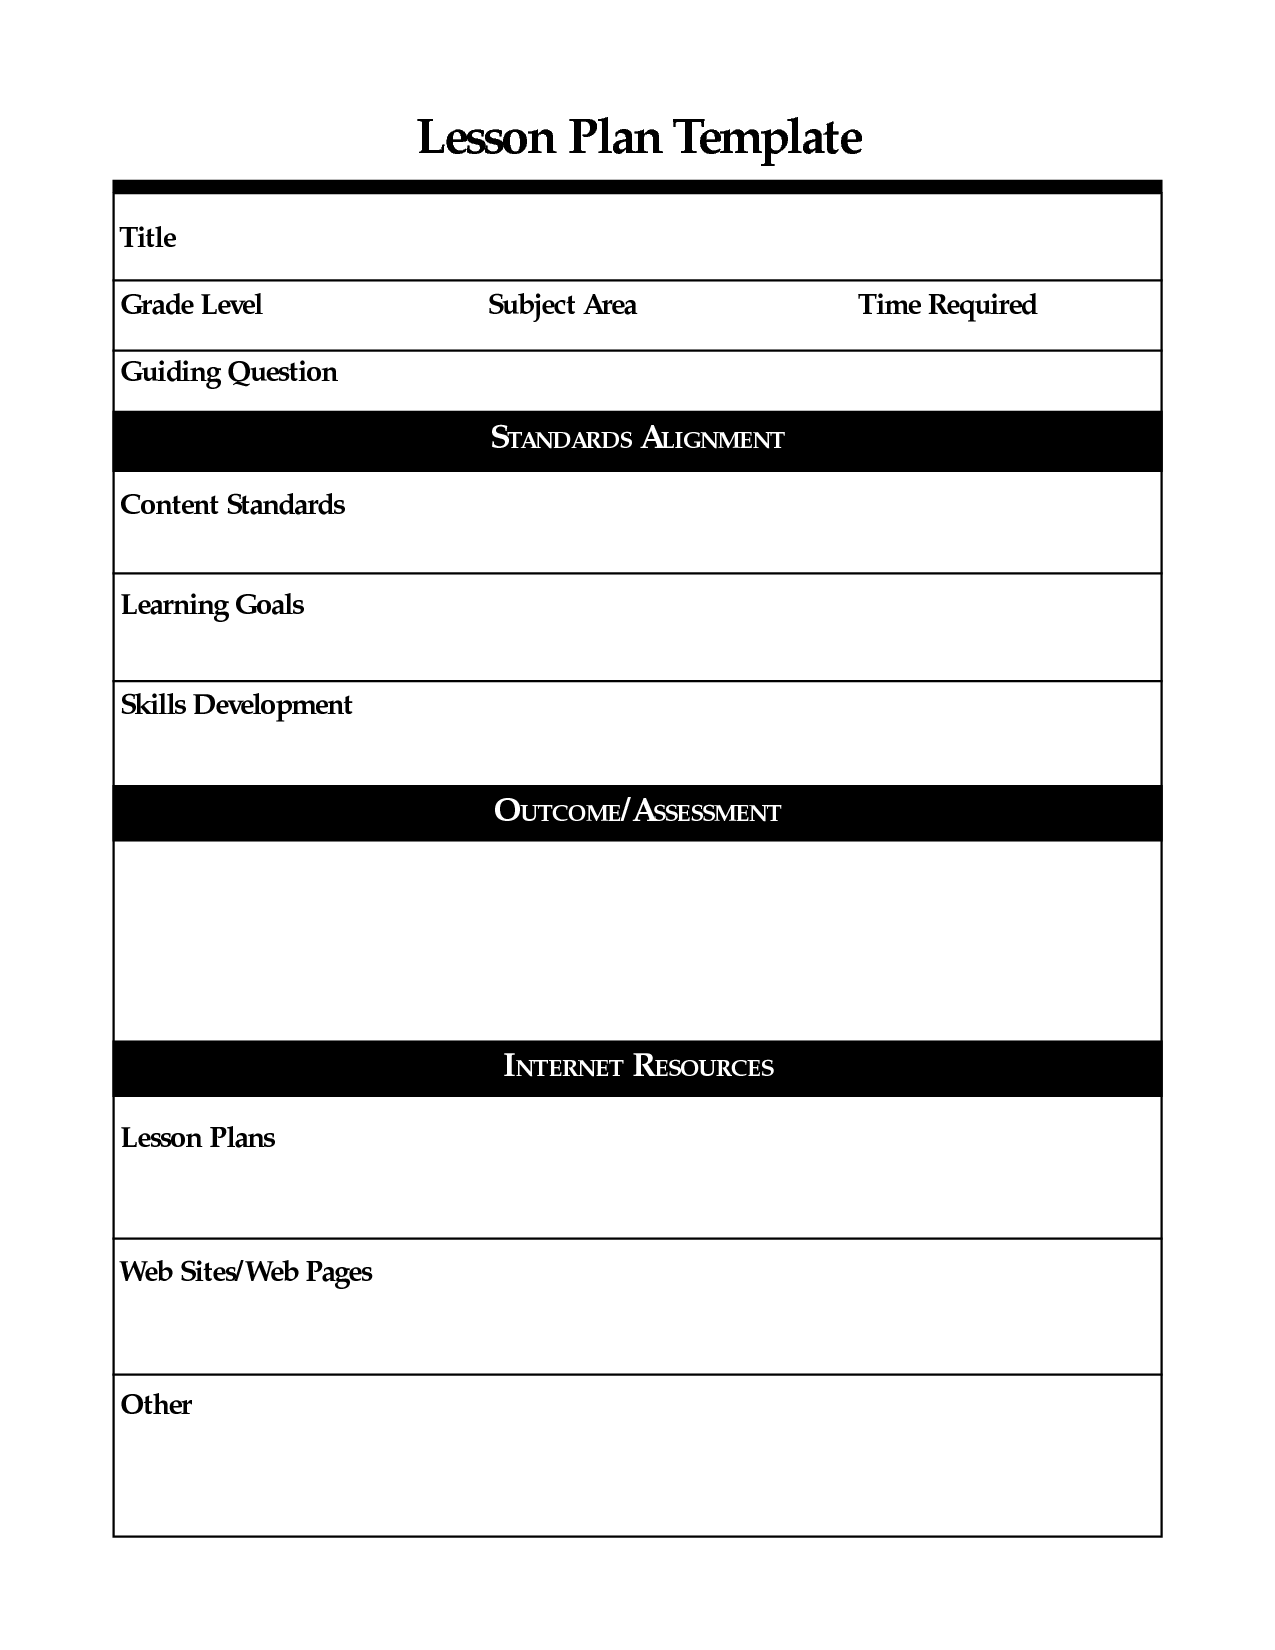 printable-lesson-plan-template-free-to-download